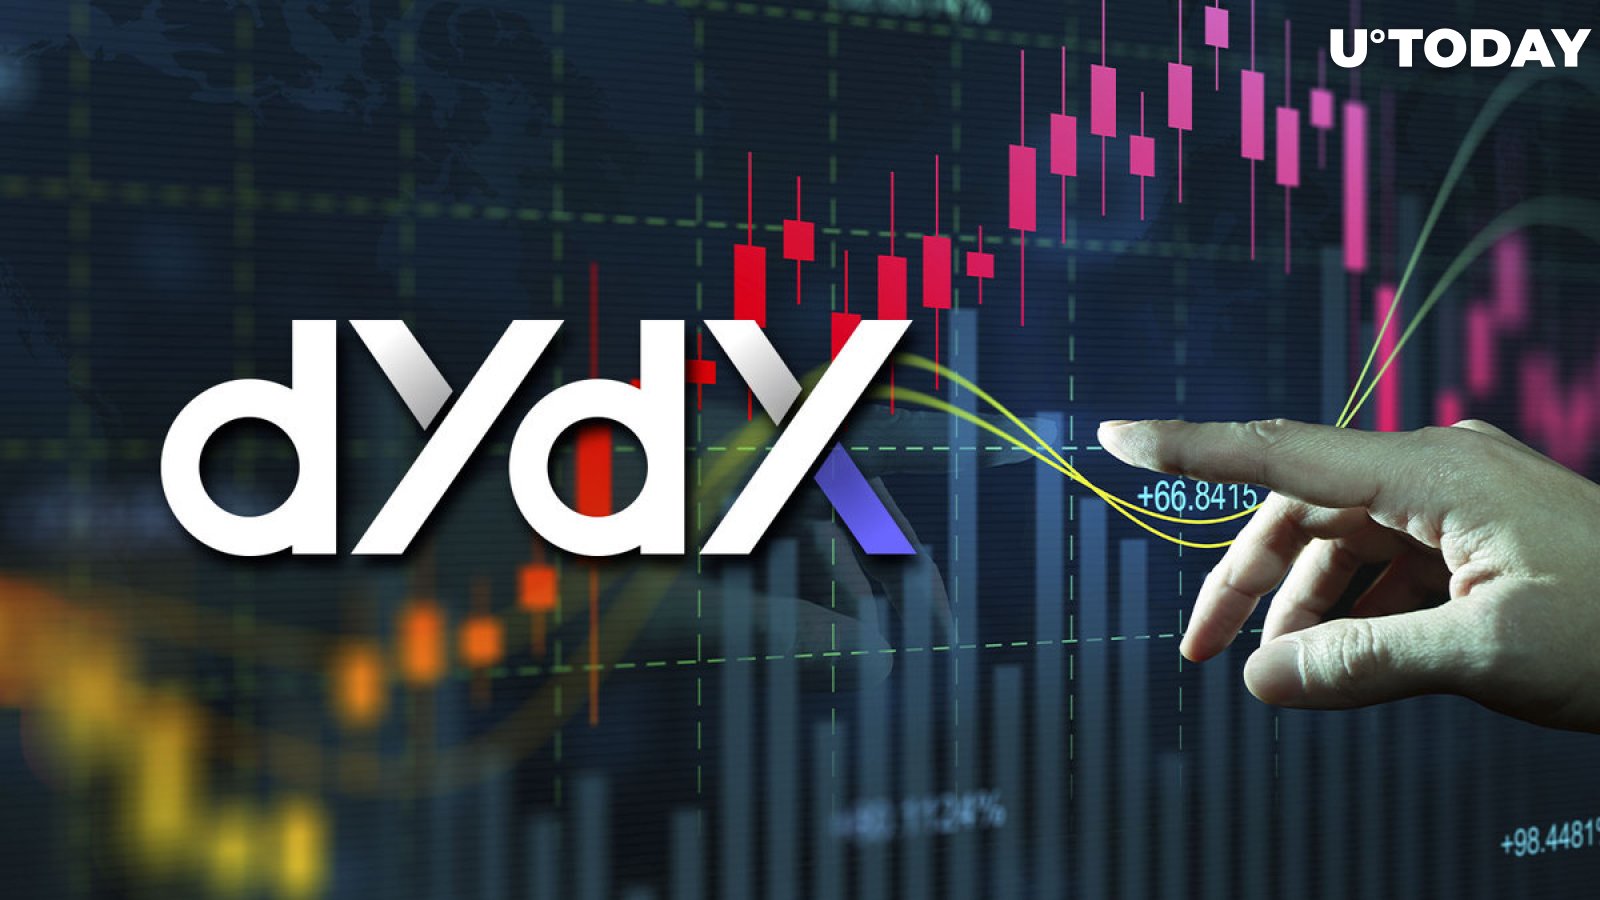 dYdX Price Spikes 35% After FTX Crash, Here's Who Benefited Most